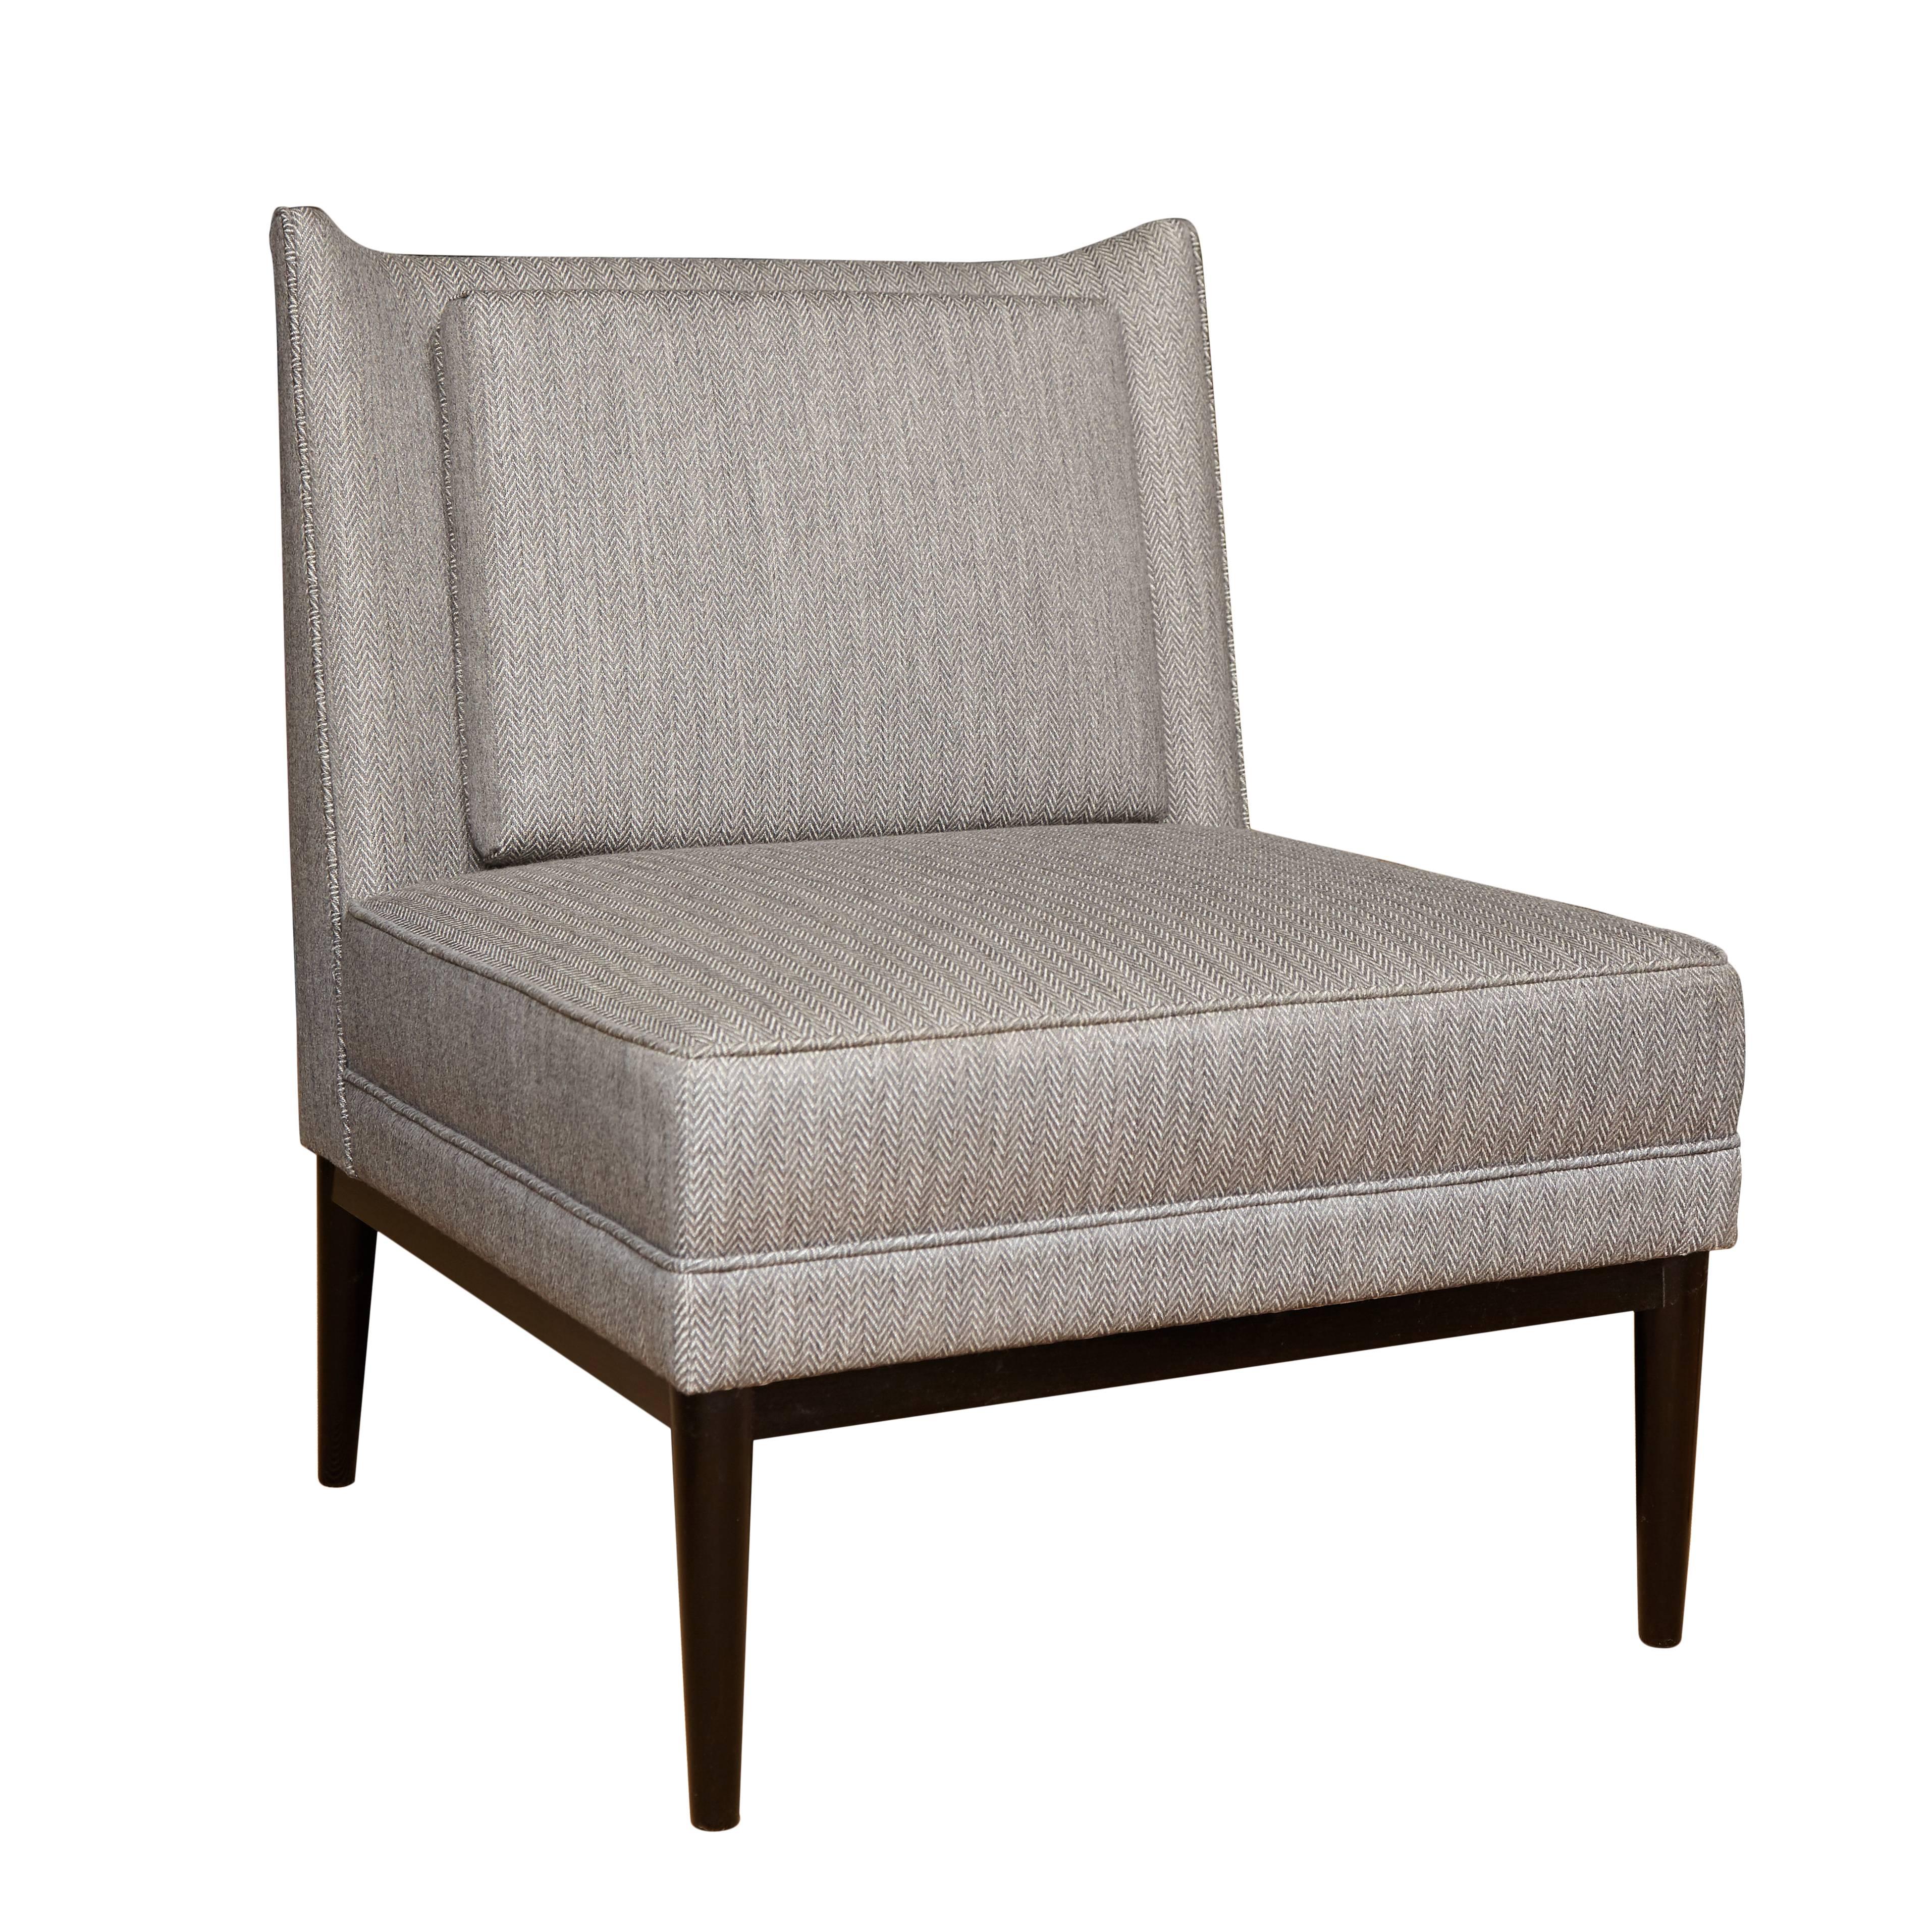 Colin slipper chair. Single loose back cushion with generous seat width and depth.
Measures: Seat height 15”
Seat depth 24”
COM requirements: Three yards
5% up-charge for contrasting fabrics and or welting
COL Requirements: 60 sq. feet
5%